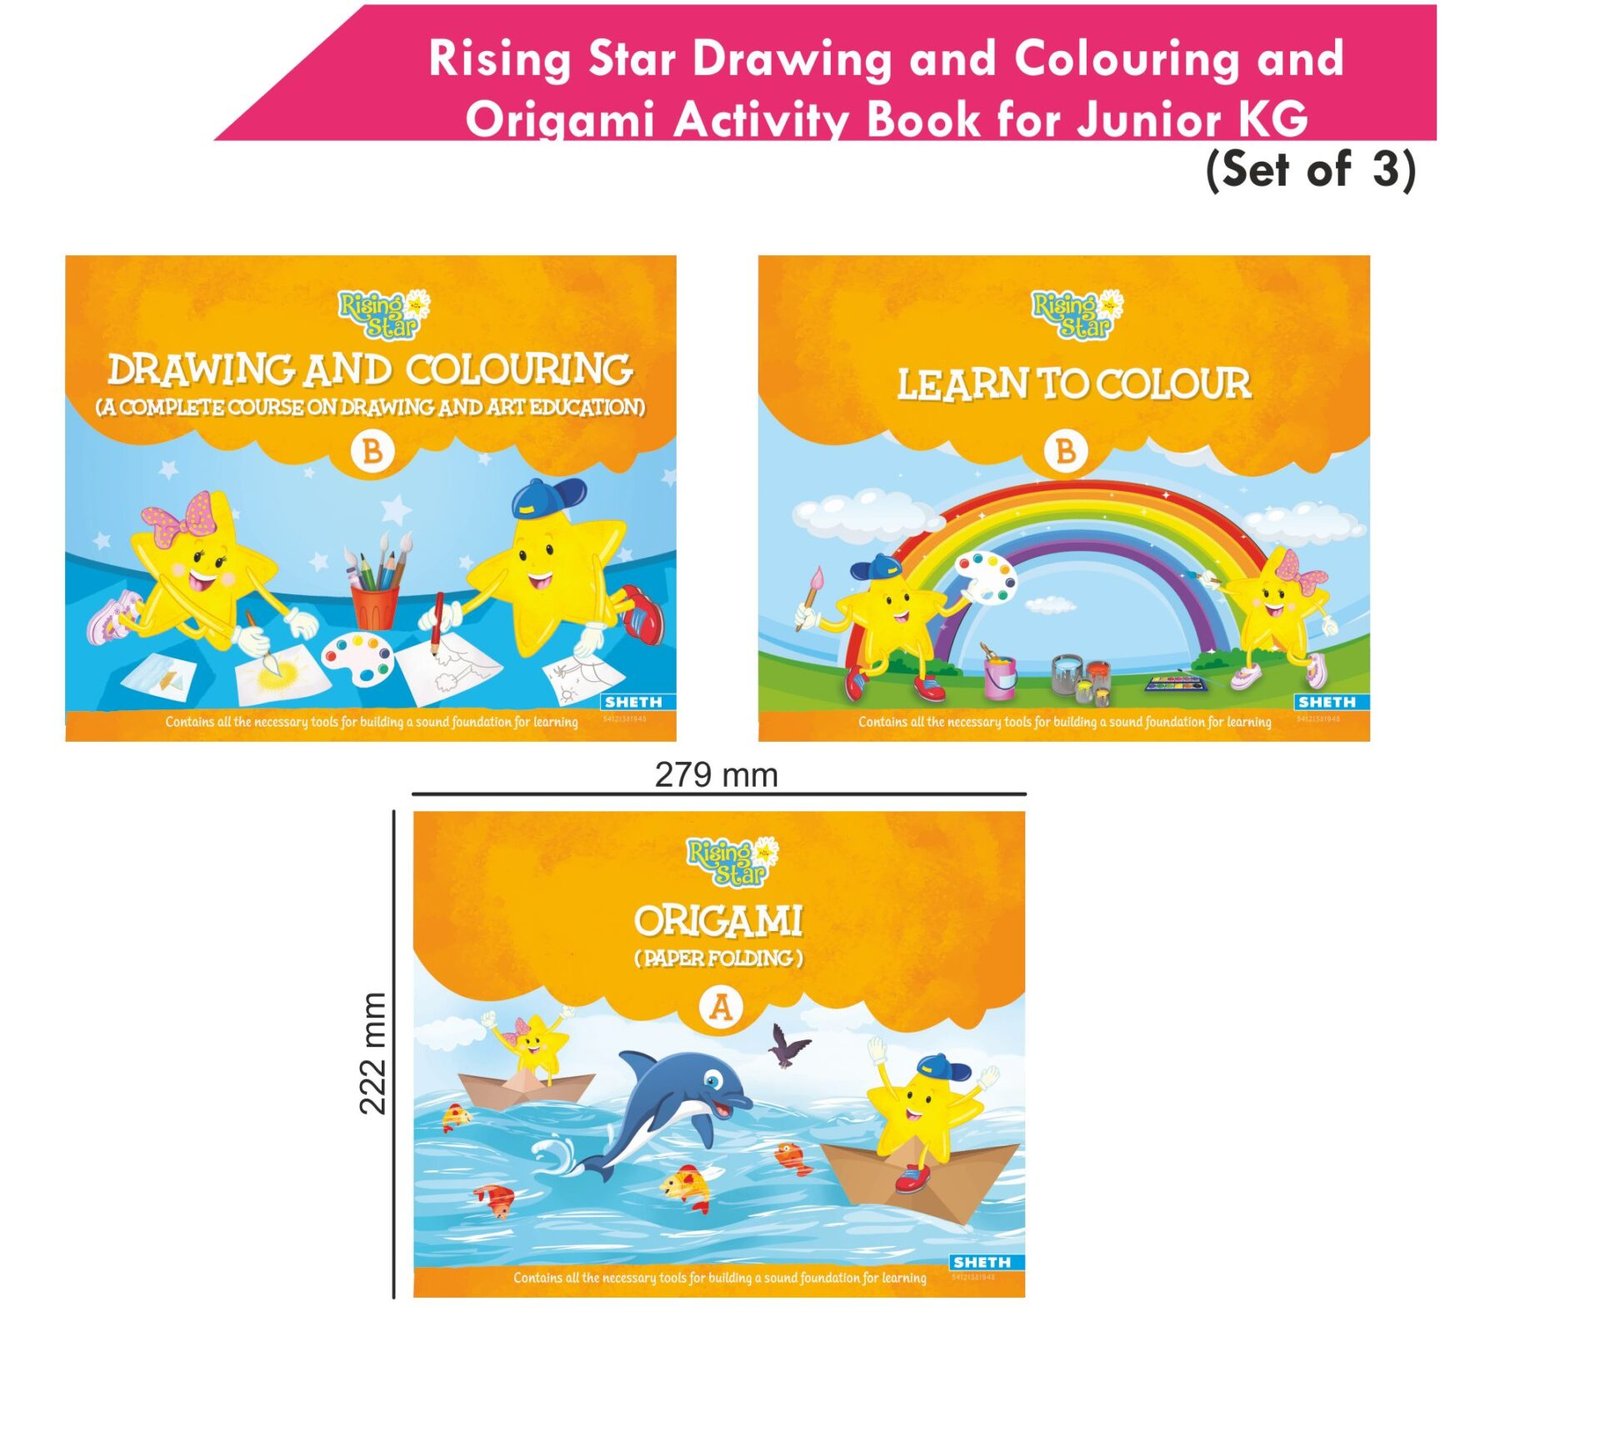 Rising Star Drawing and Colouring and Origami Activity Book for Junior KG Set of 3 2